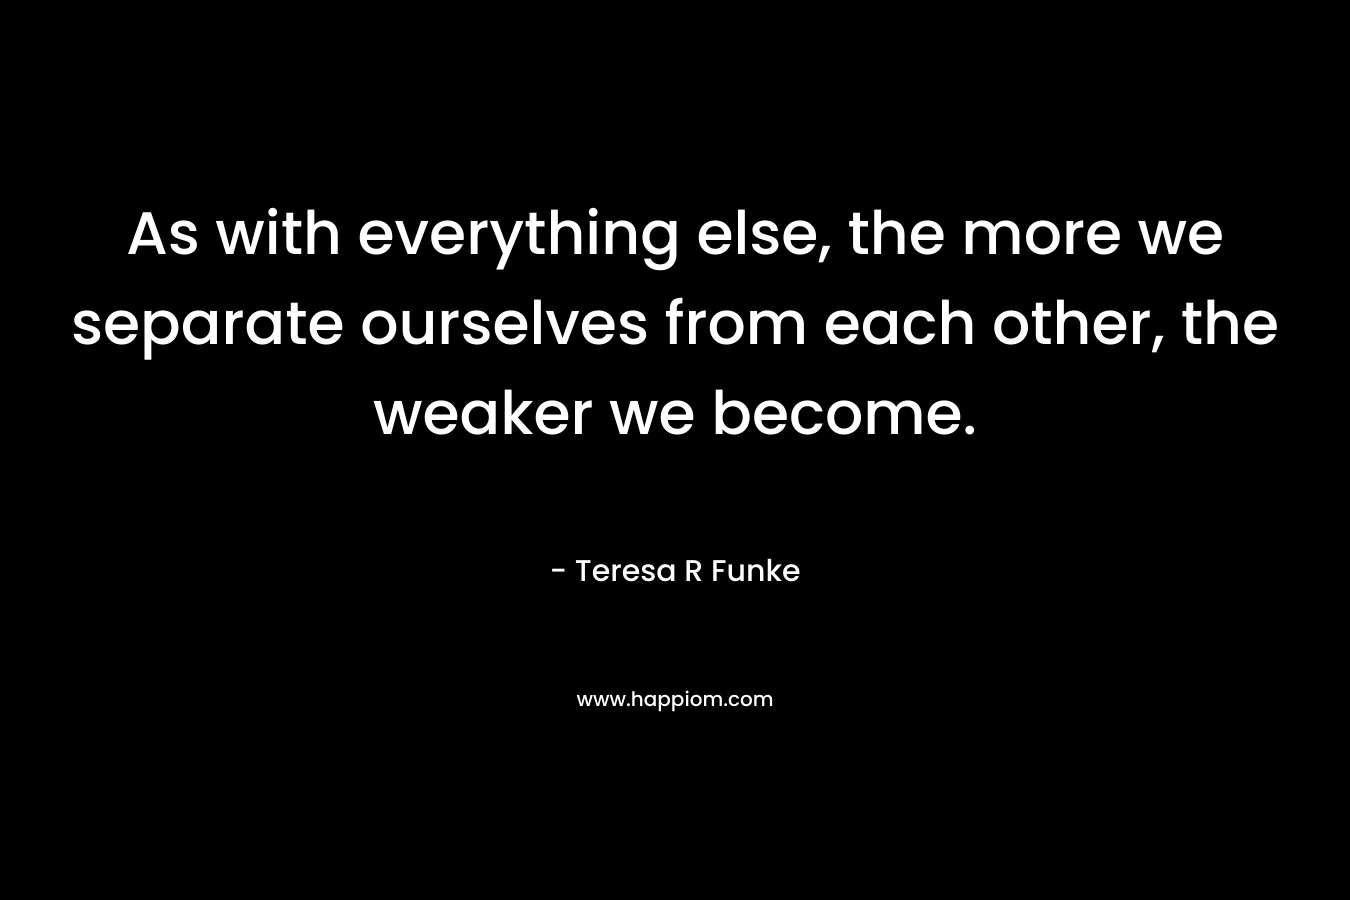 As with everything else, the more we separate ourselves from each other, the weaker we become.